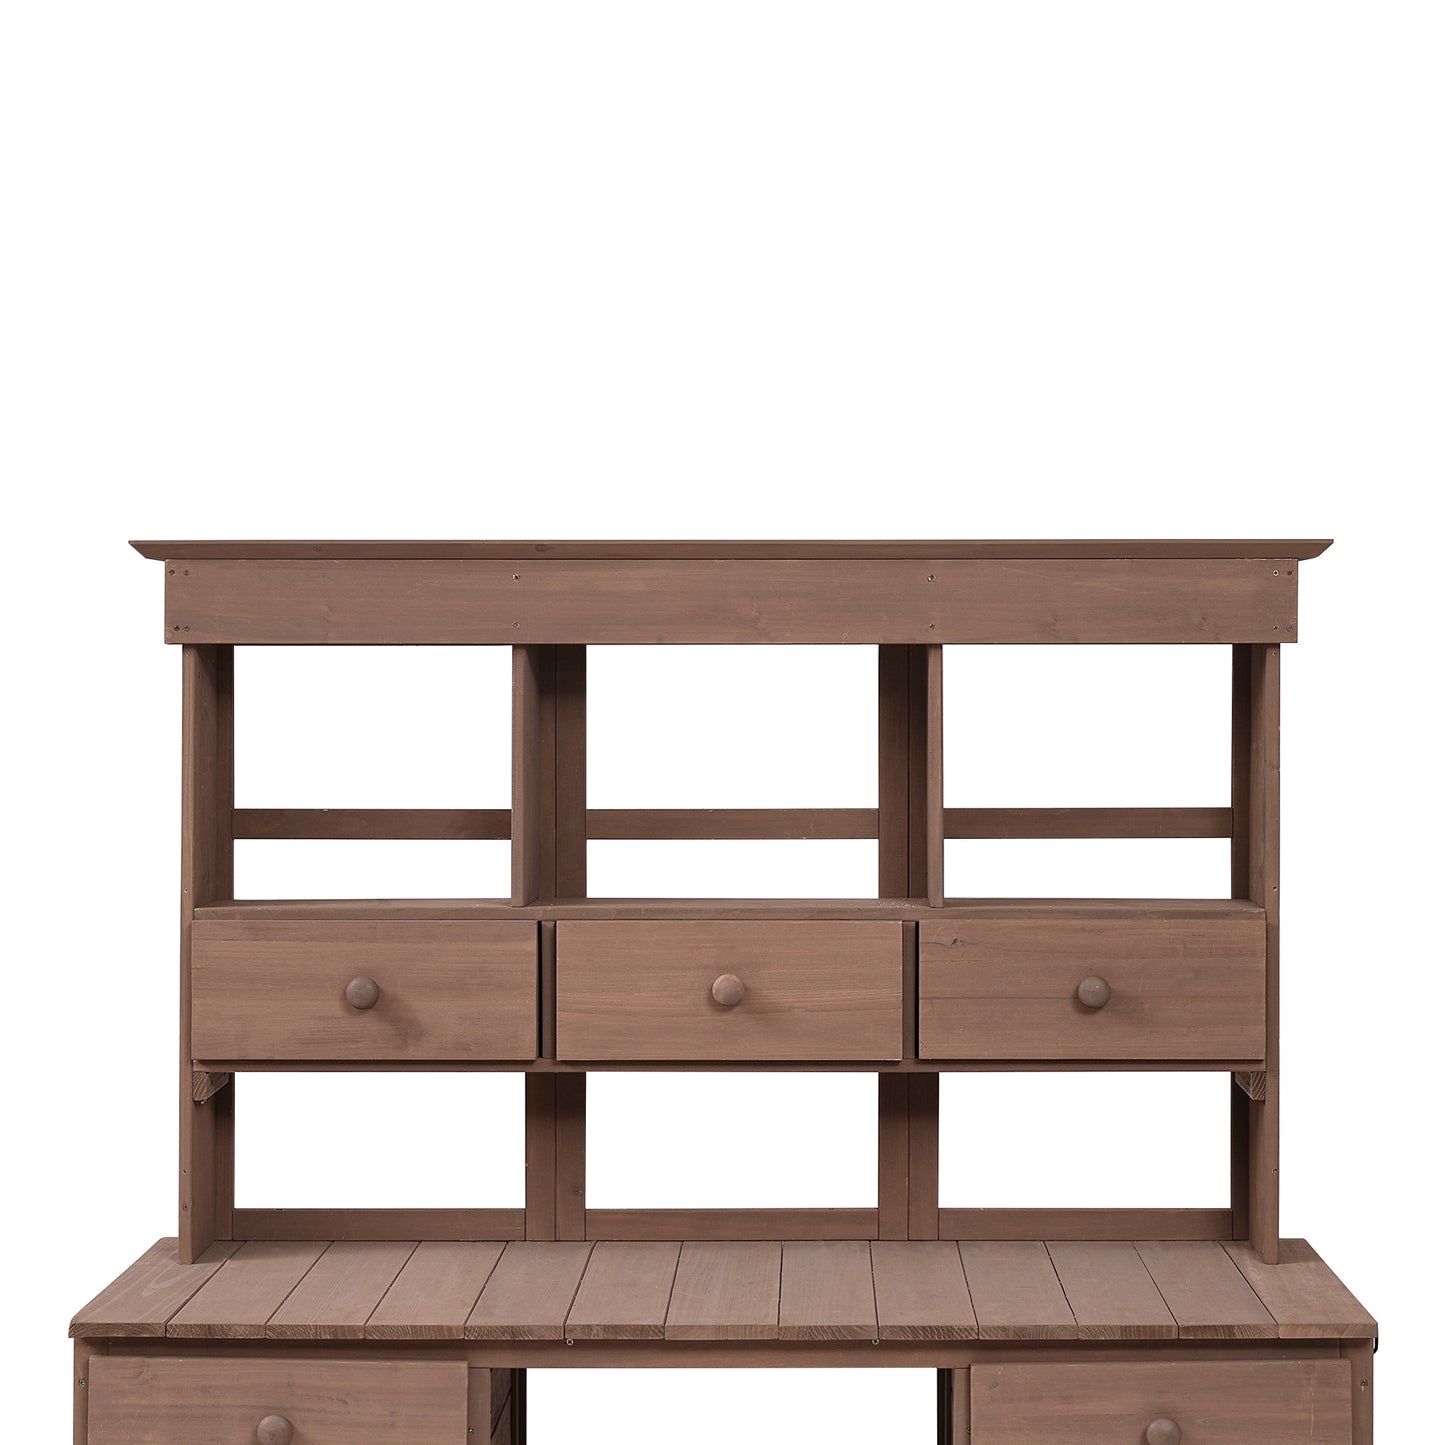 [Video Provided] TOPMAX Garden Potting Bench Table, Rustic and Sleek Design with Multiple Drawers and Shelves for Storage, Brown